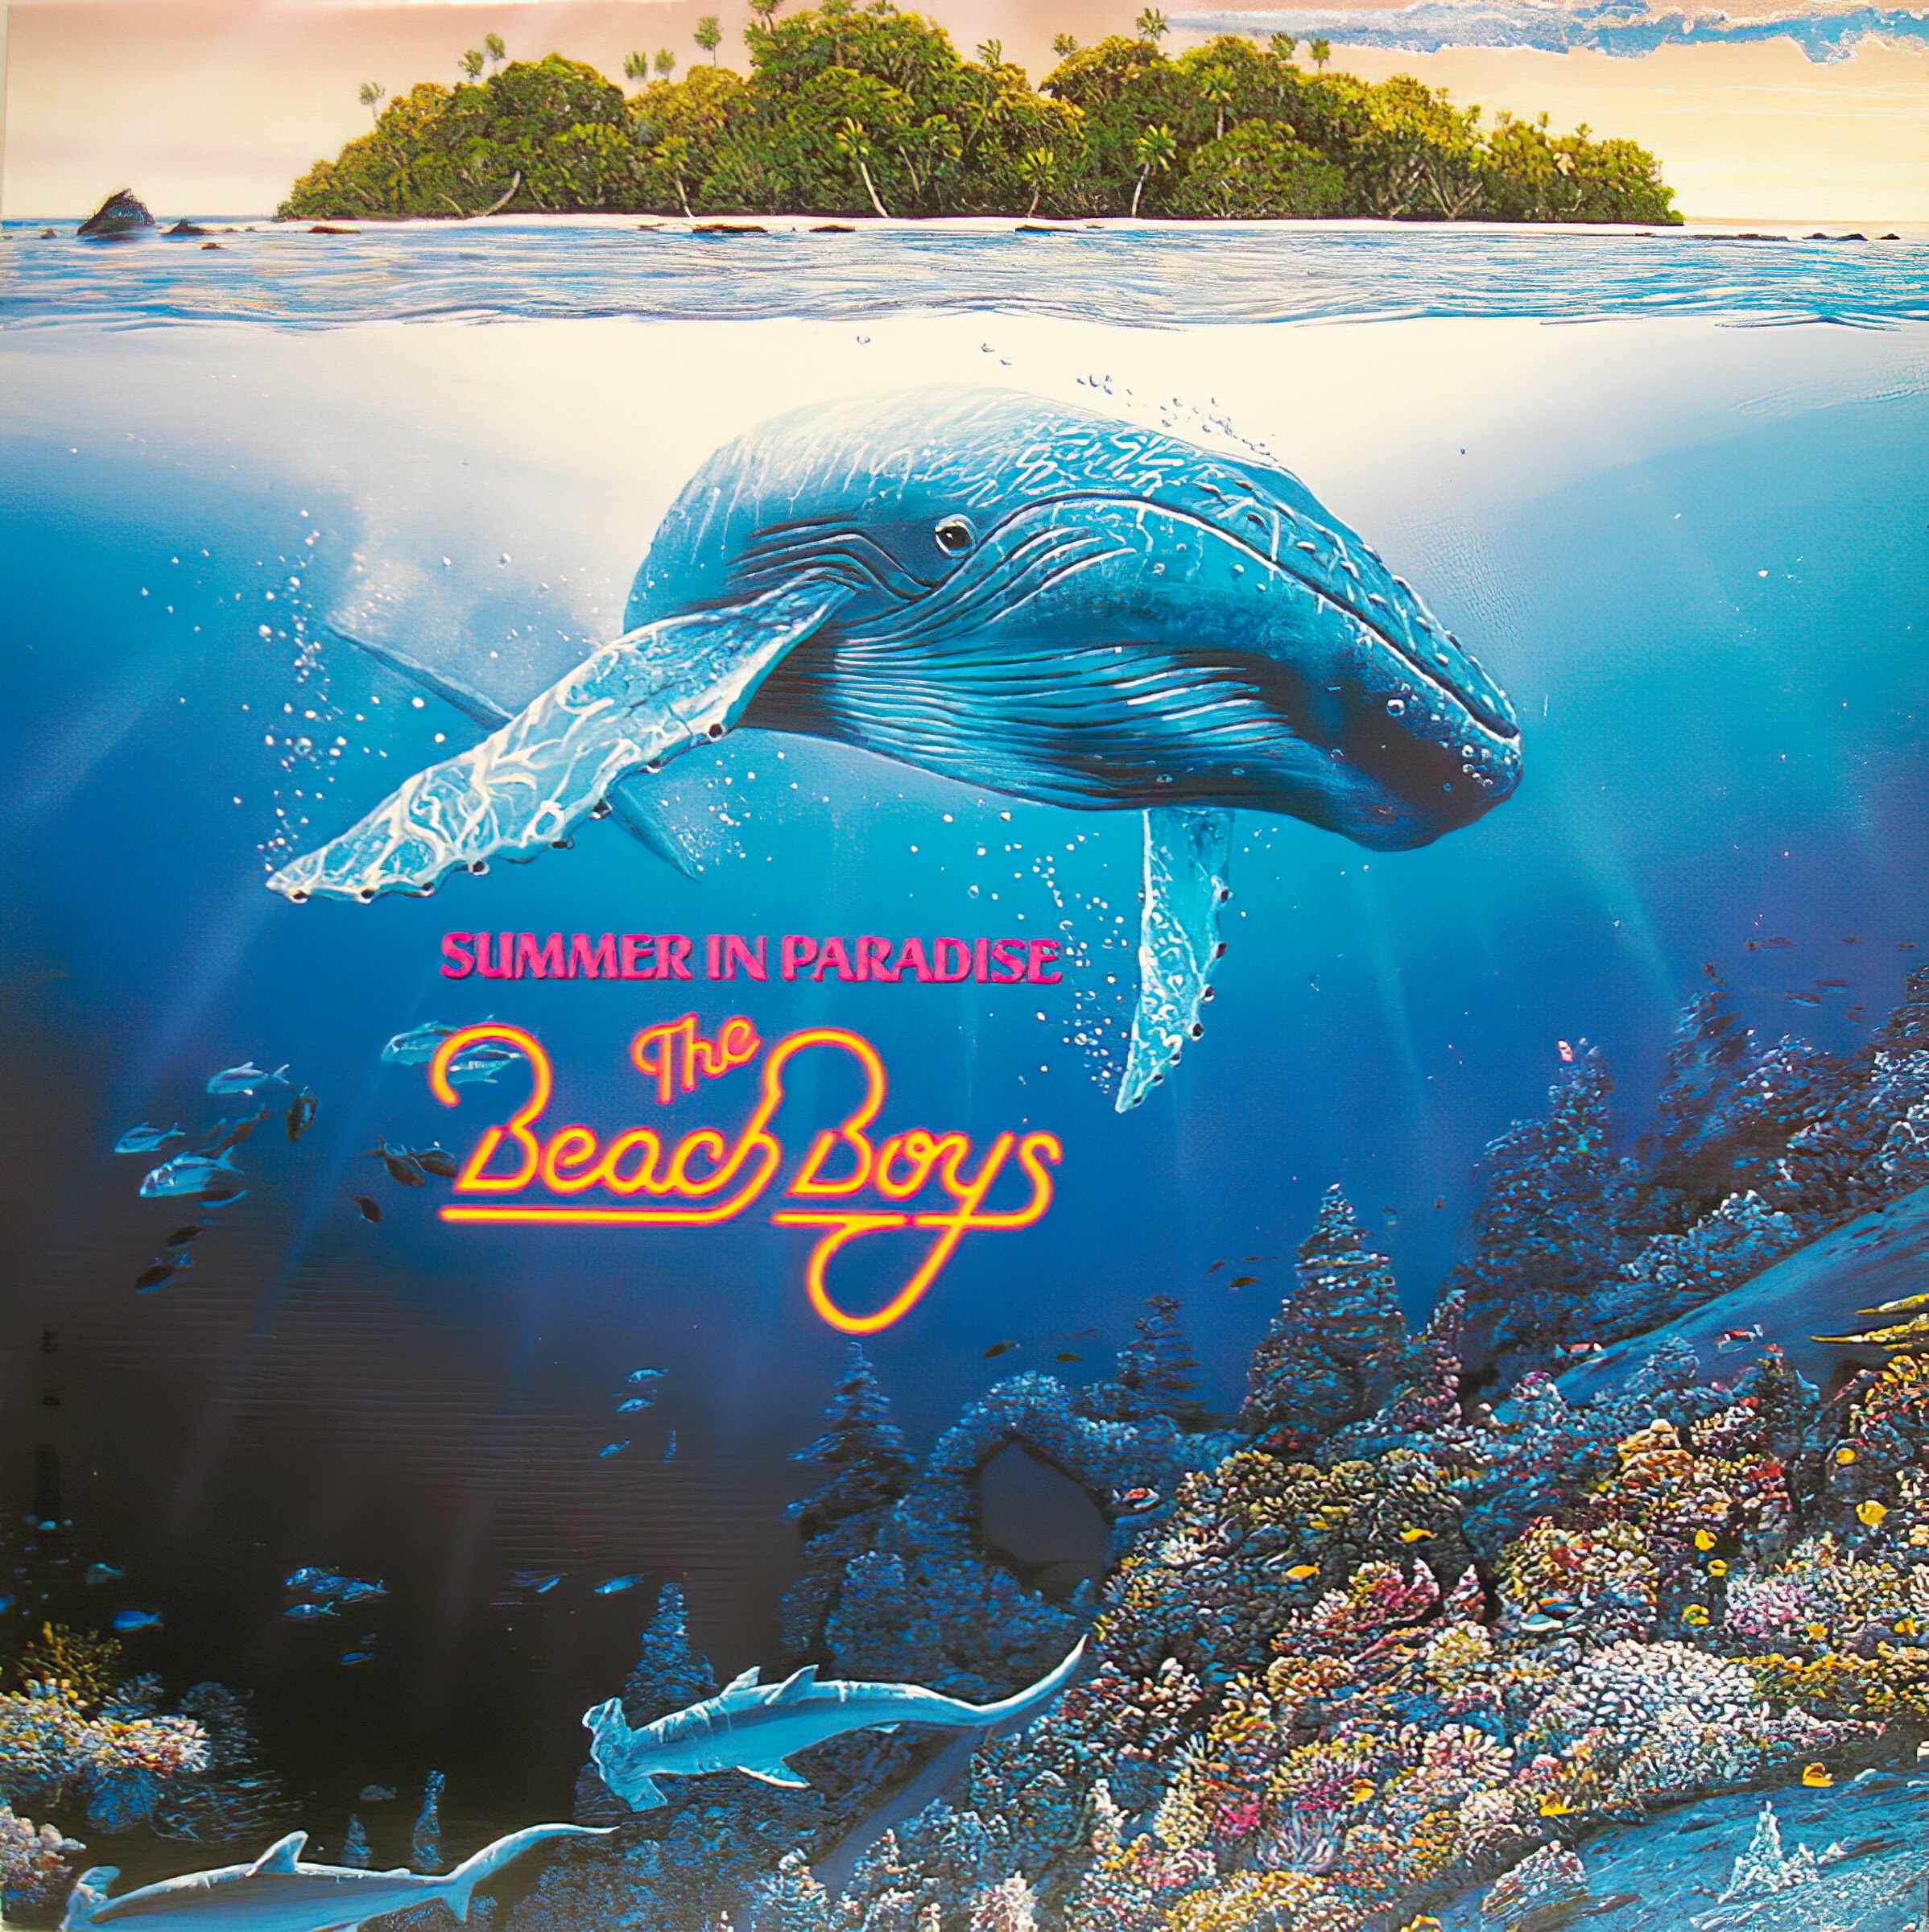 The Beach Boys - Summer in Paradise - Reviews - Album of The Year